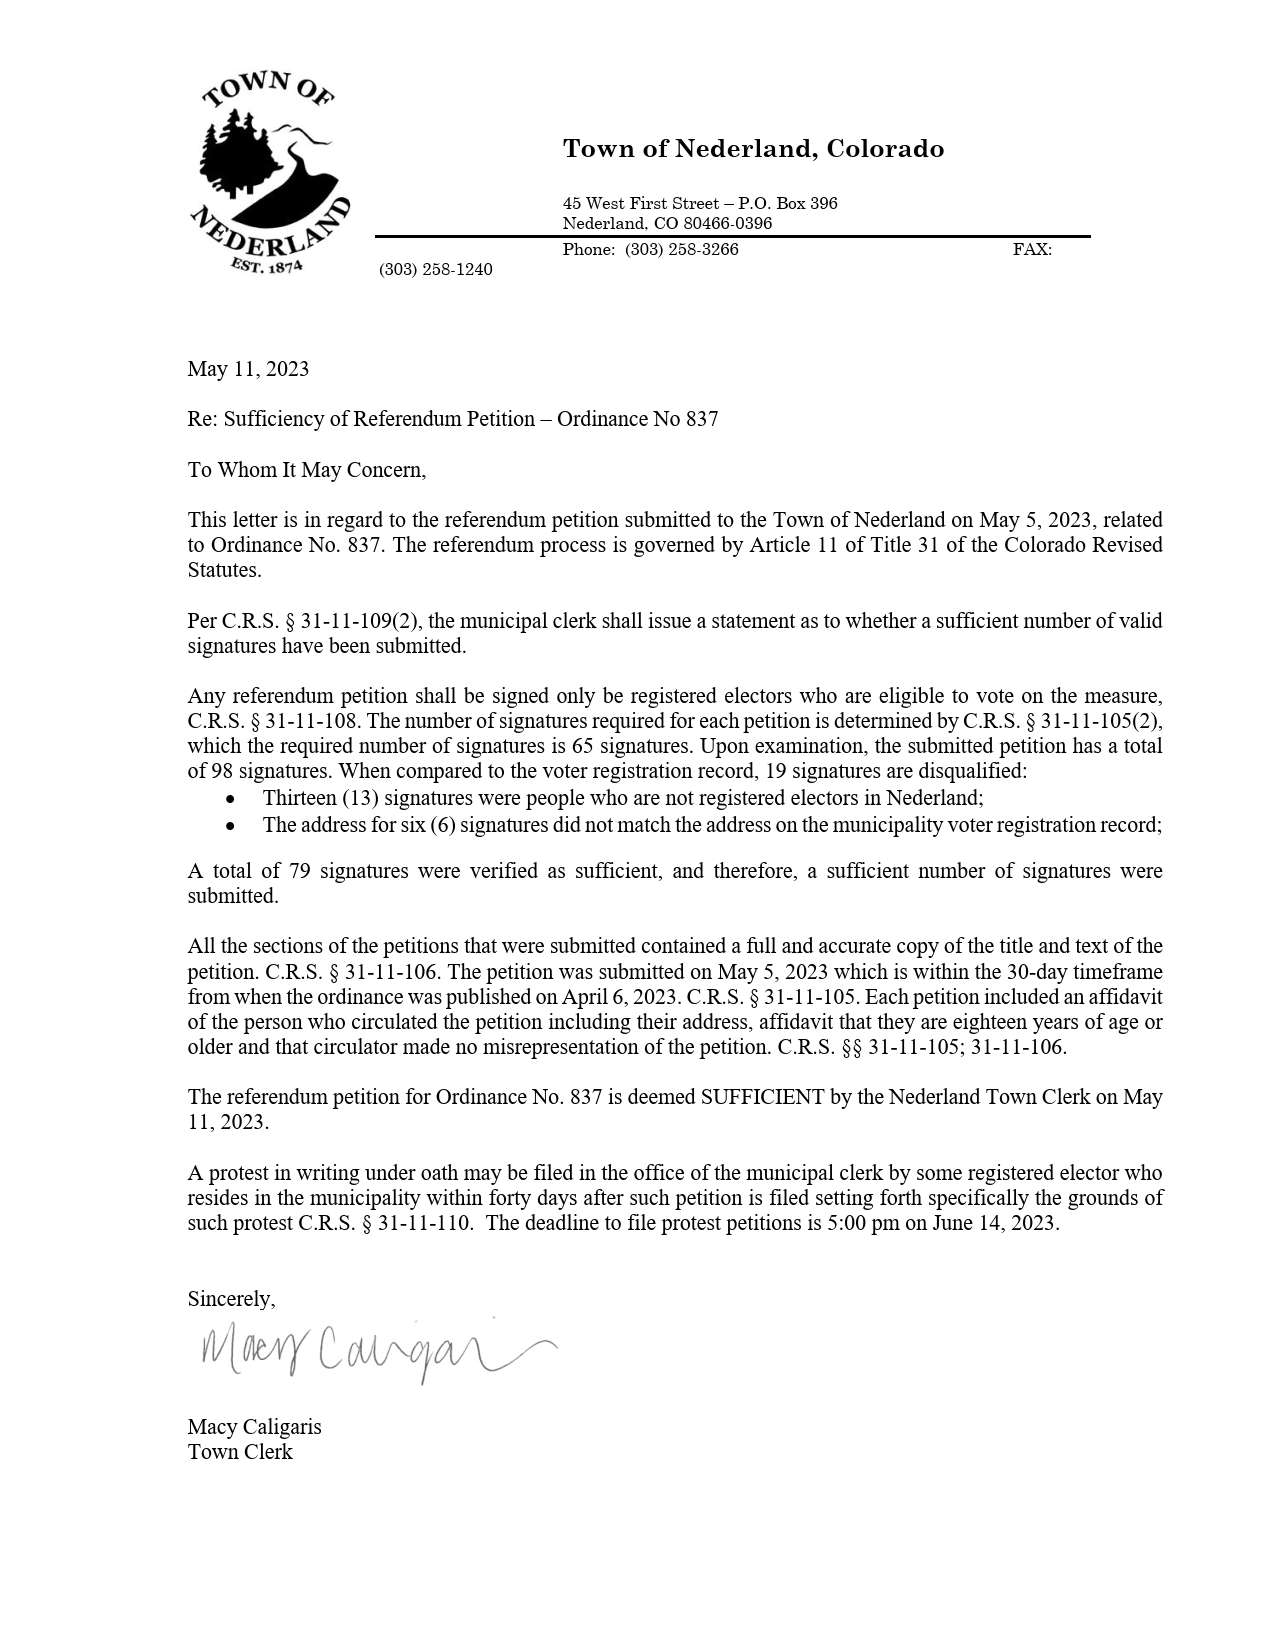 Image of the Statement of Sufficiency - Referendum Petition for Ordinance 837. The text version can be found at https://nederlandco.civicweb.net/document/45738